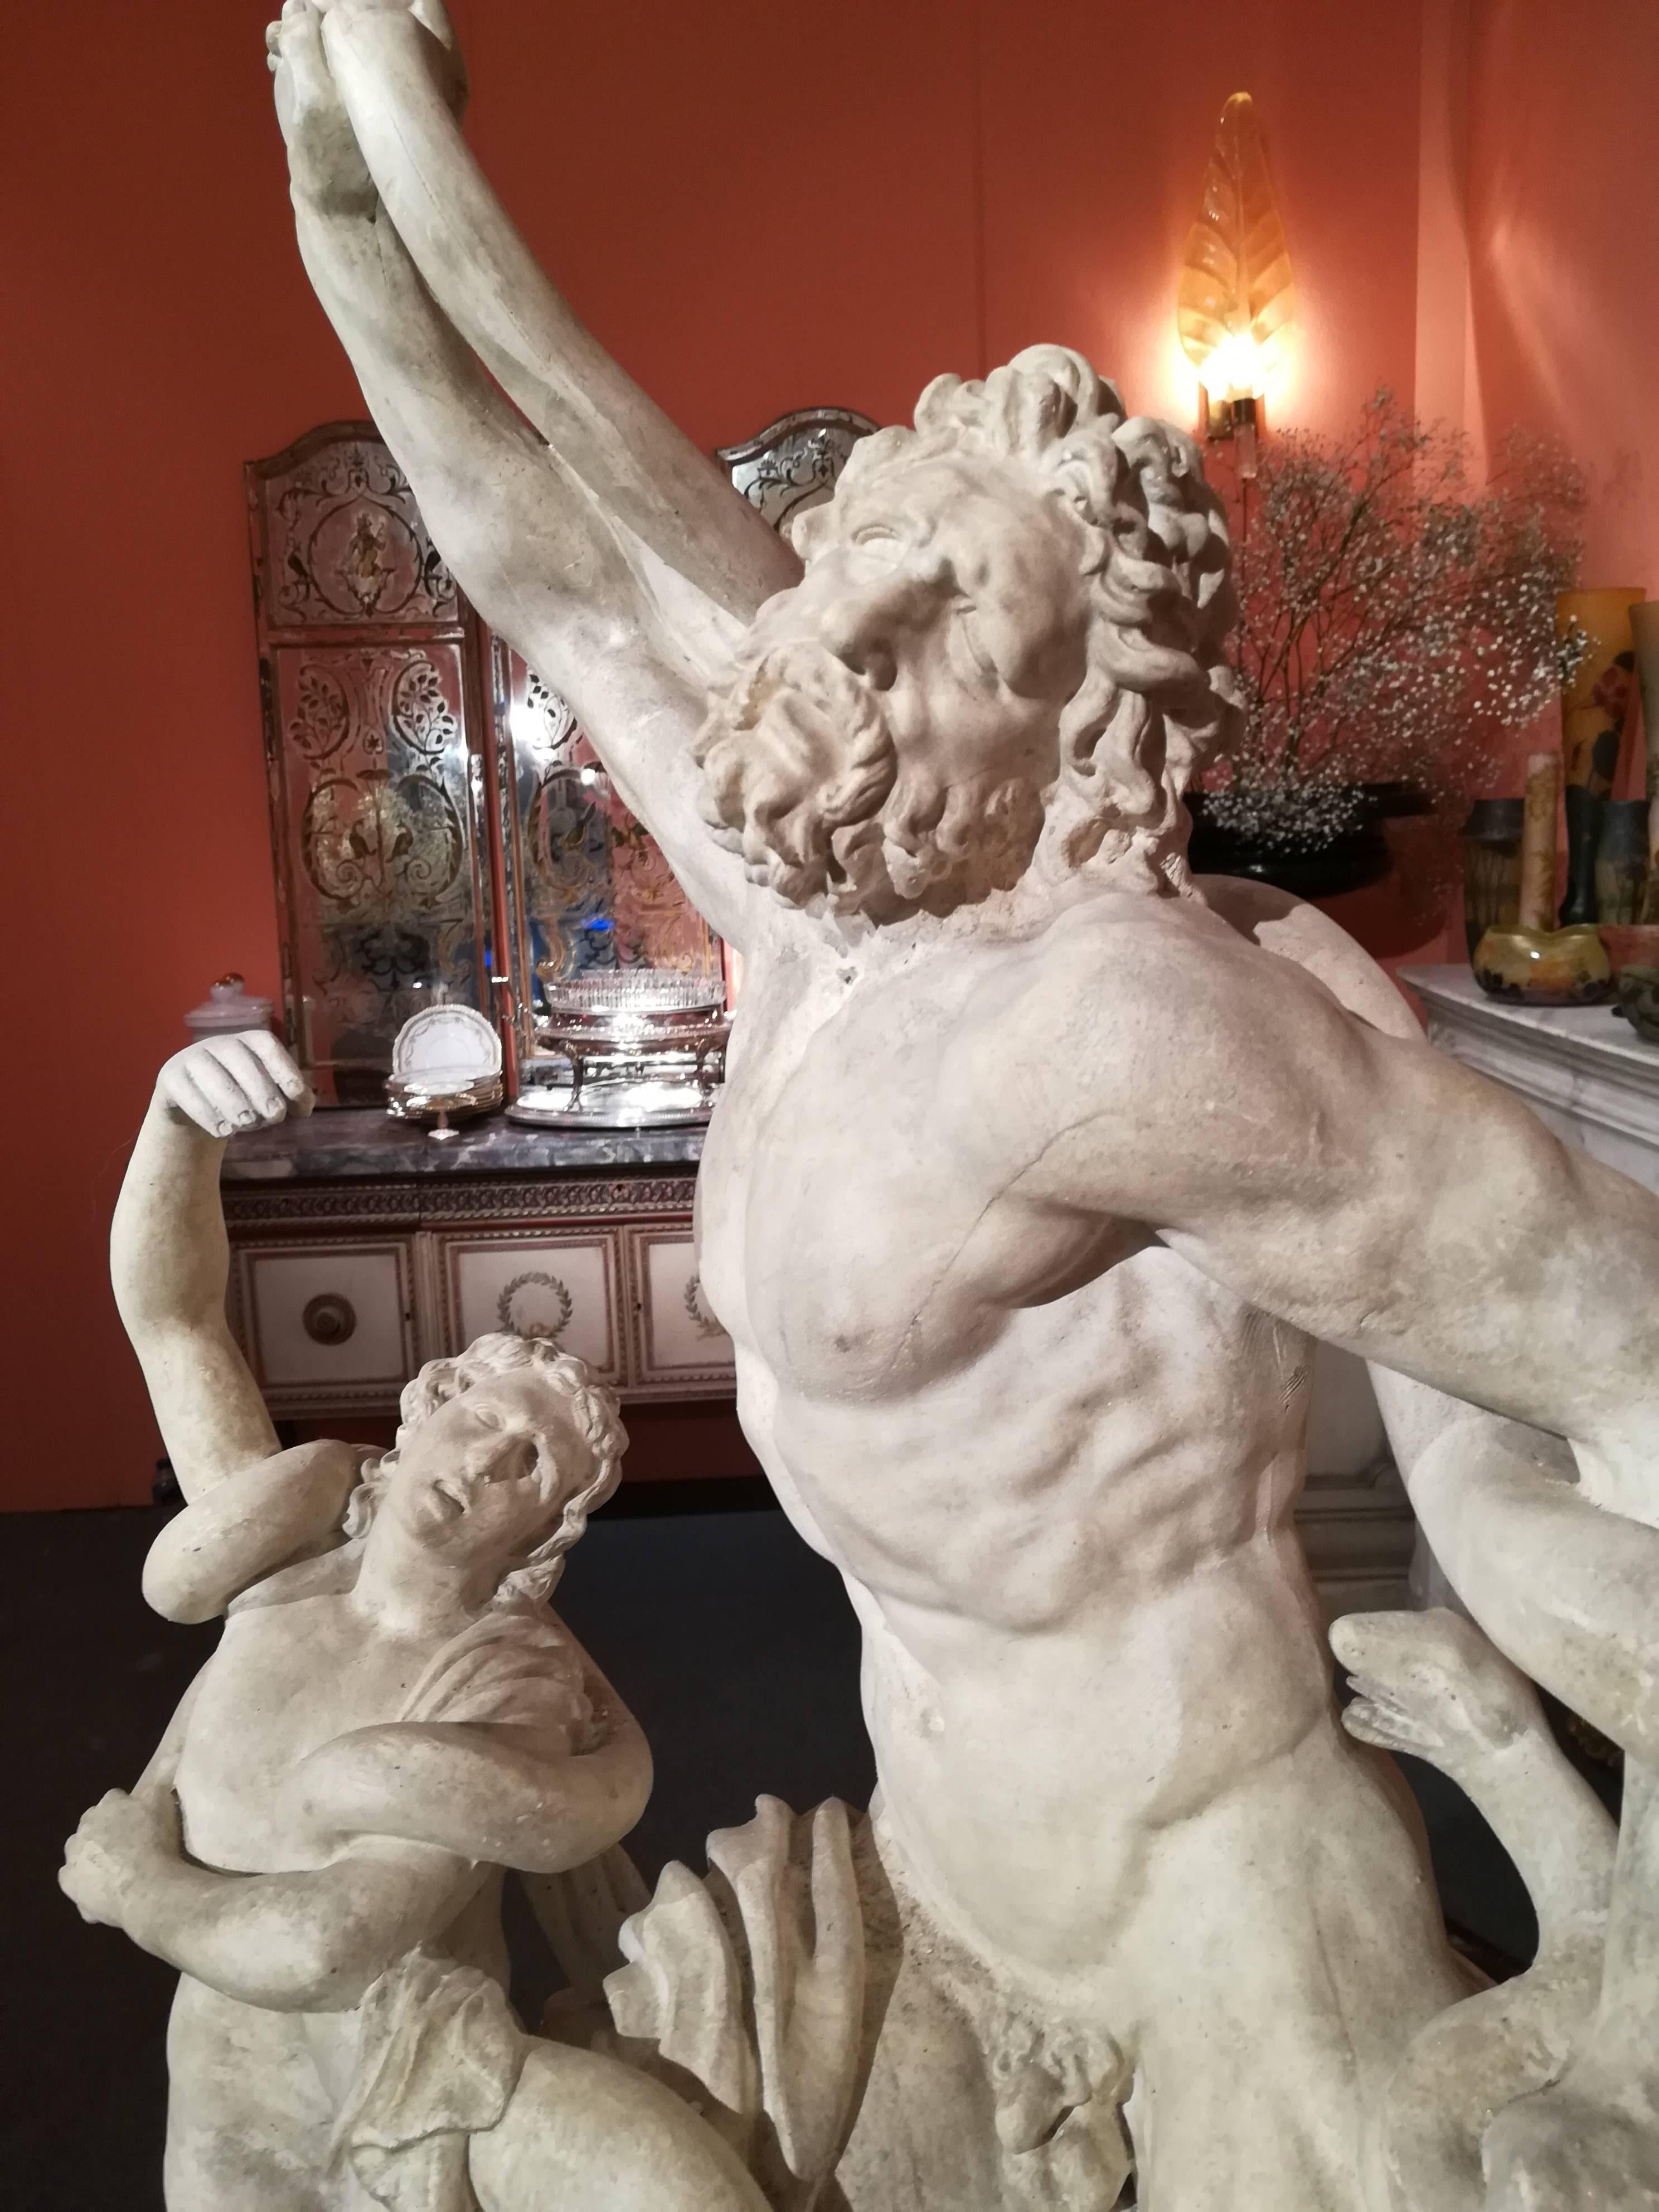 European 19th Century, Sculpture Plaster Reproduction of the Greek Antique Laocoon Group For Sale